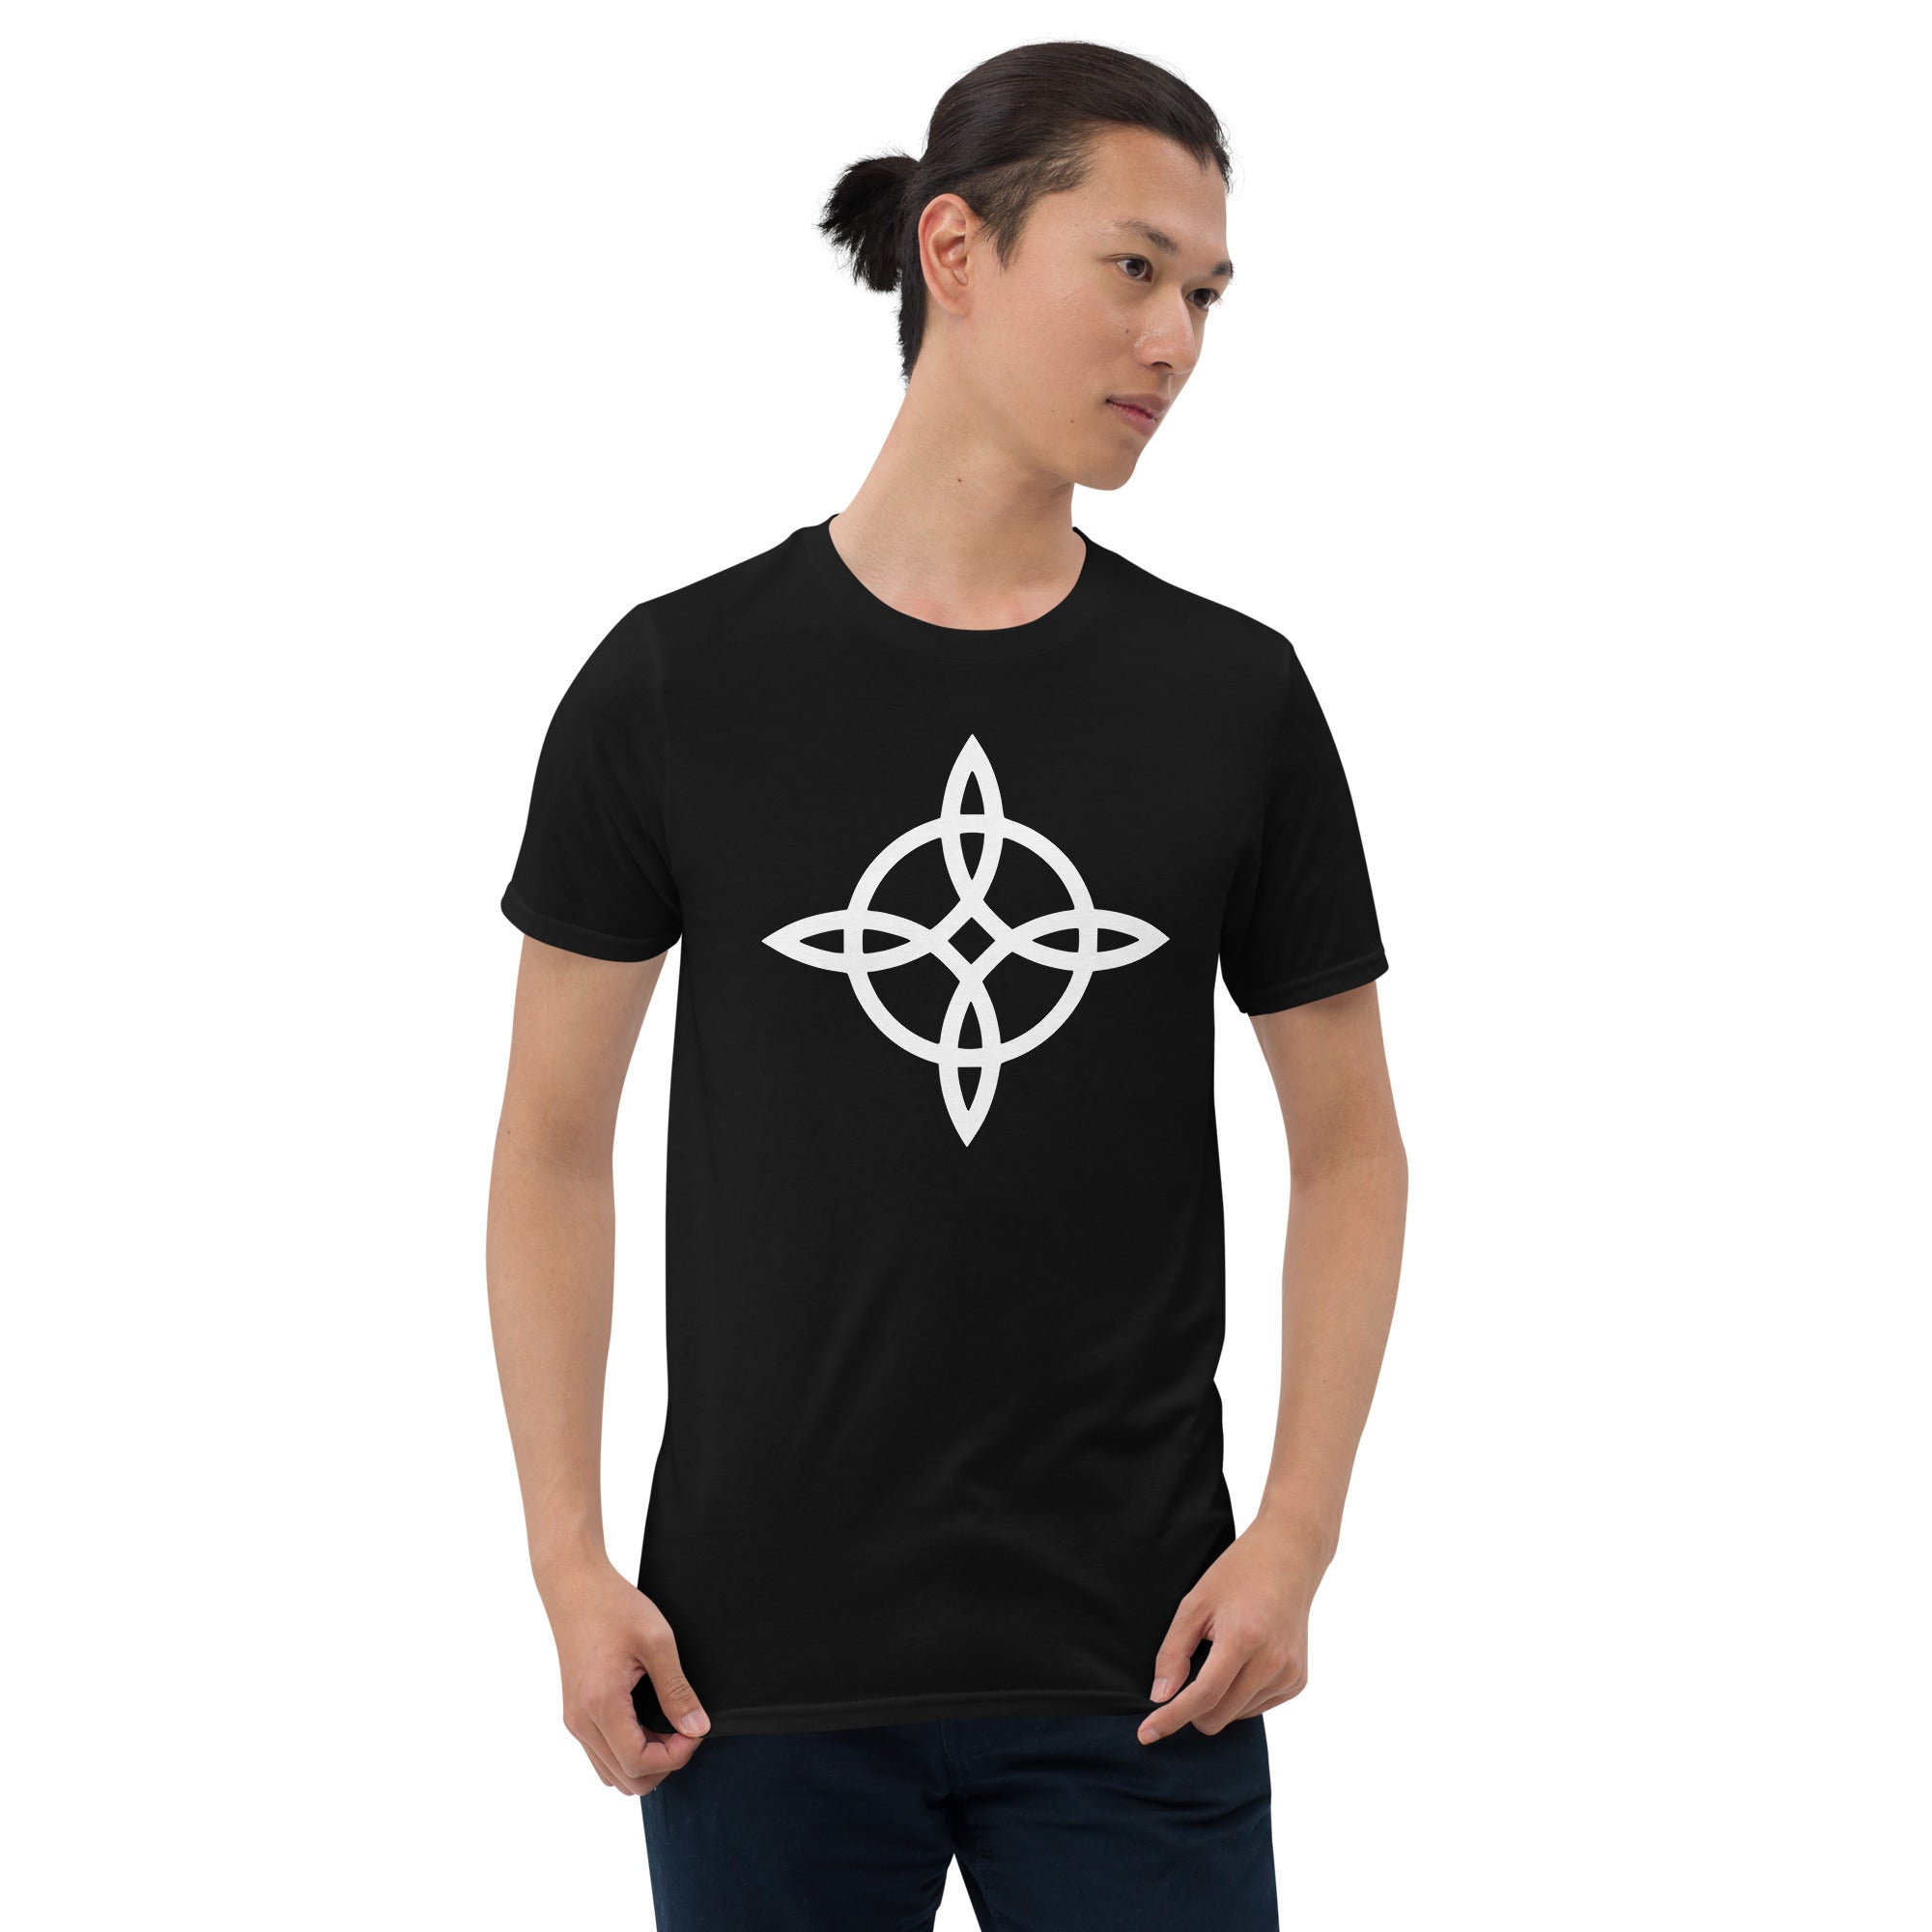 The Witches Knot Witchcraft Protection Symbol Short-Sleeve T-Shirt